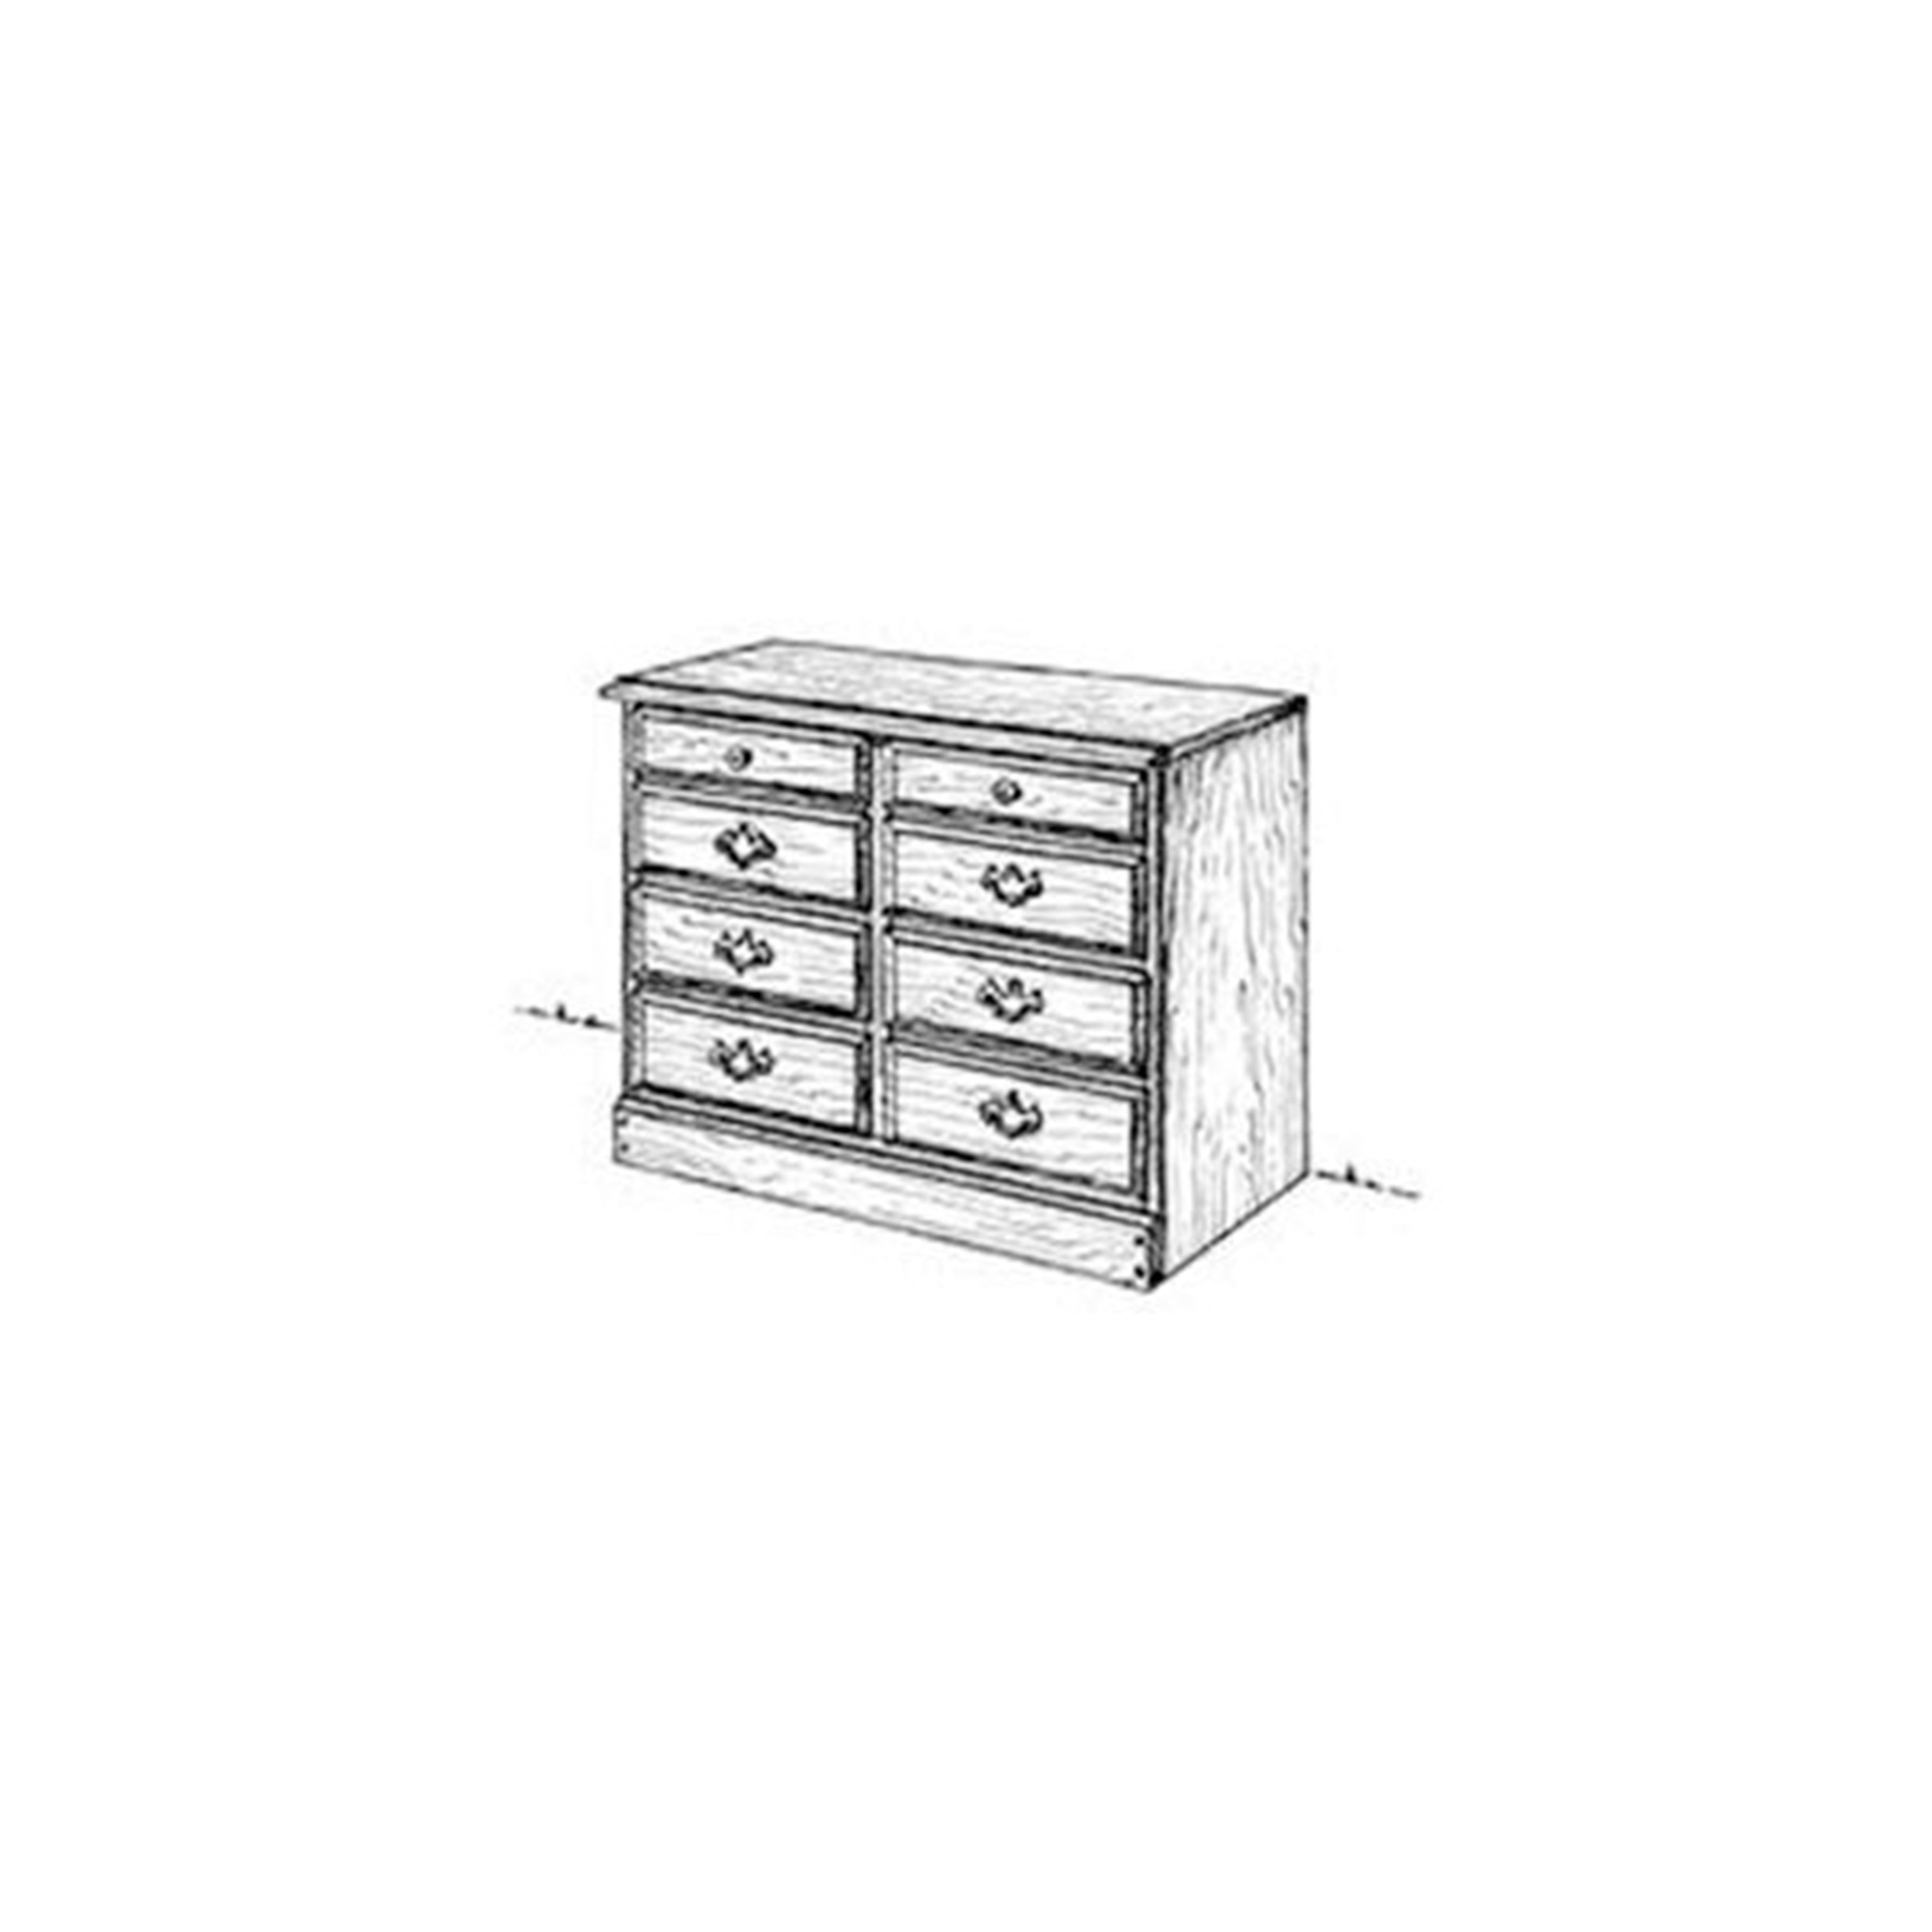 Woodworking Project Paper Plan To Build Chest Of Drawers 30